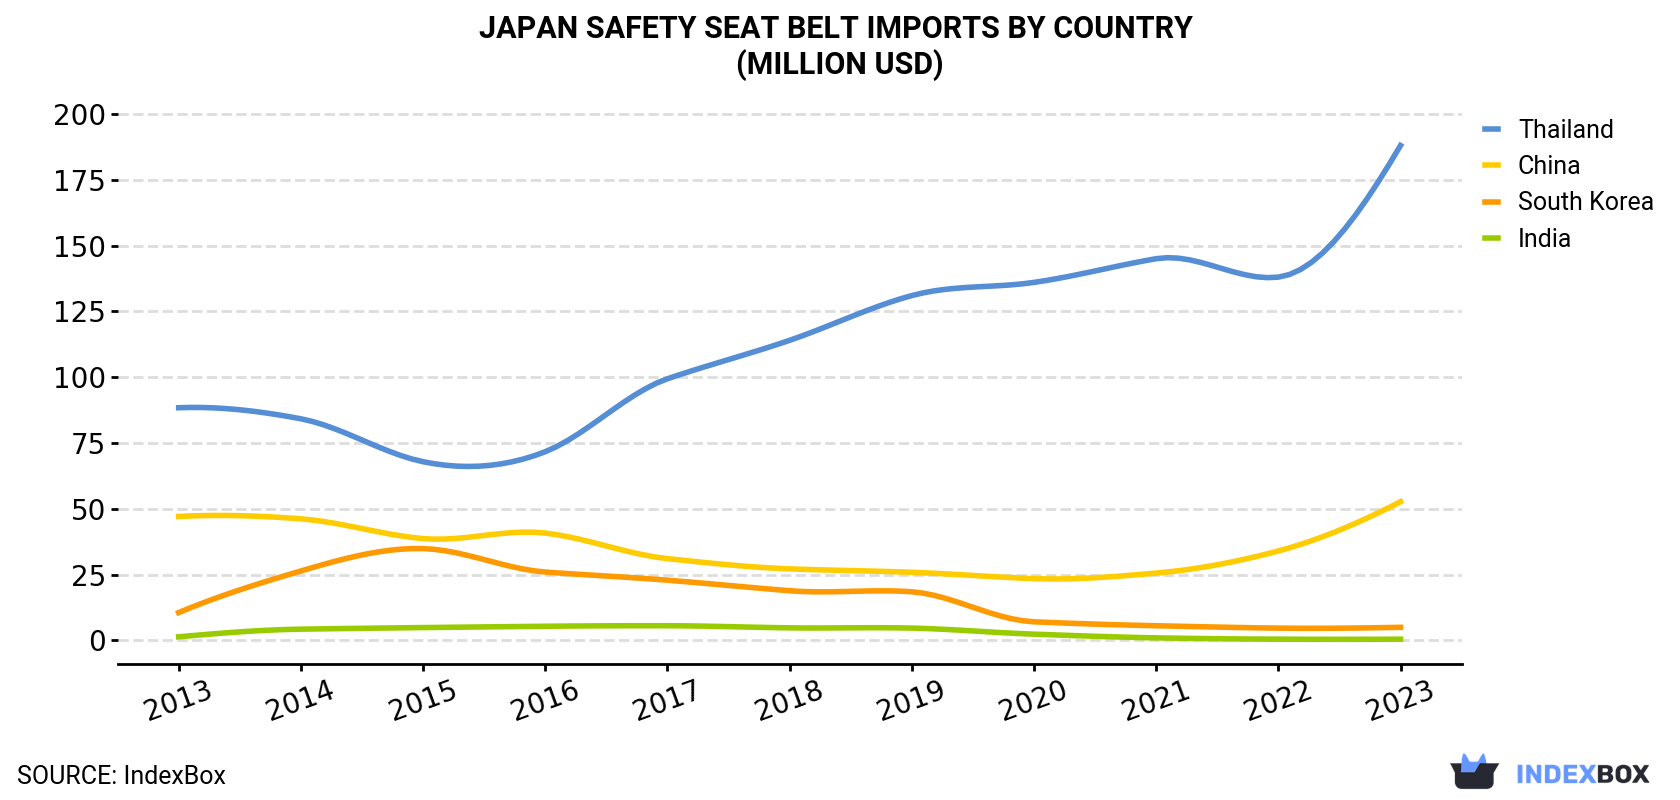 Japan Safety Seat Belt Imports By Country (Million USD)